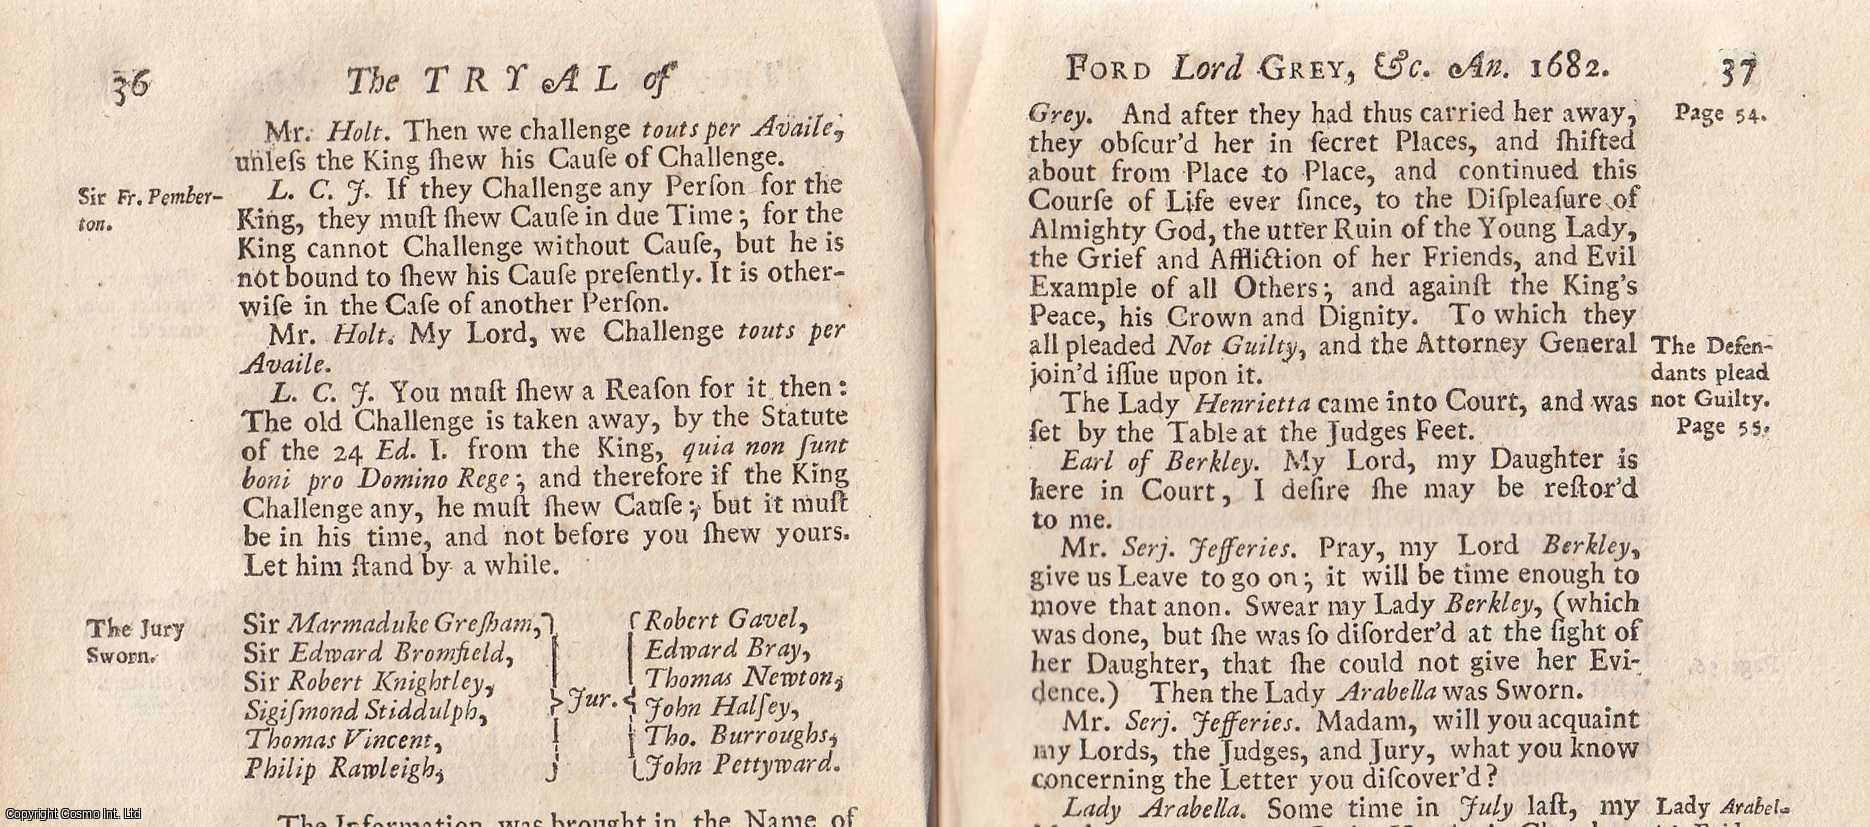 [Trial] - The Trial of Ford Lord Grey of Werk, Robert Charnock, Anne Charnock, David Jones, Frances Jones, & Rebecca Jones, at the King's Bench, for a Misdemeanour, in seducing the Lady Henrietta Berkeley, Daughter of the Earl of Berkeley, and soliciting her to commit Whoredom and Adultery with Lord Grey, who was previously married to her sister, November 23, 1682. An original report from the collected Tryals for High Treason, and Other Crimes, 1720.